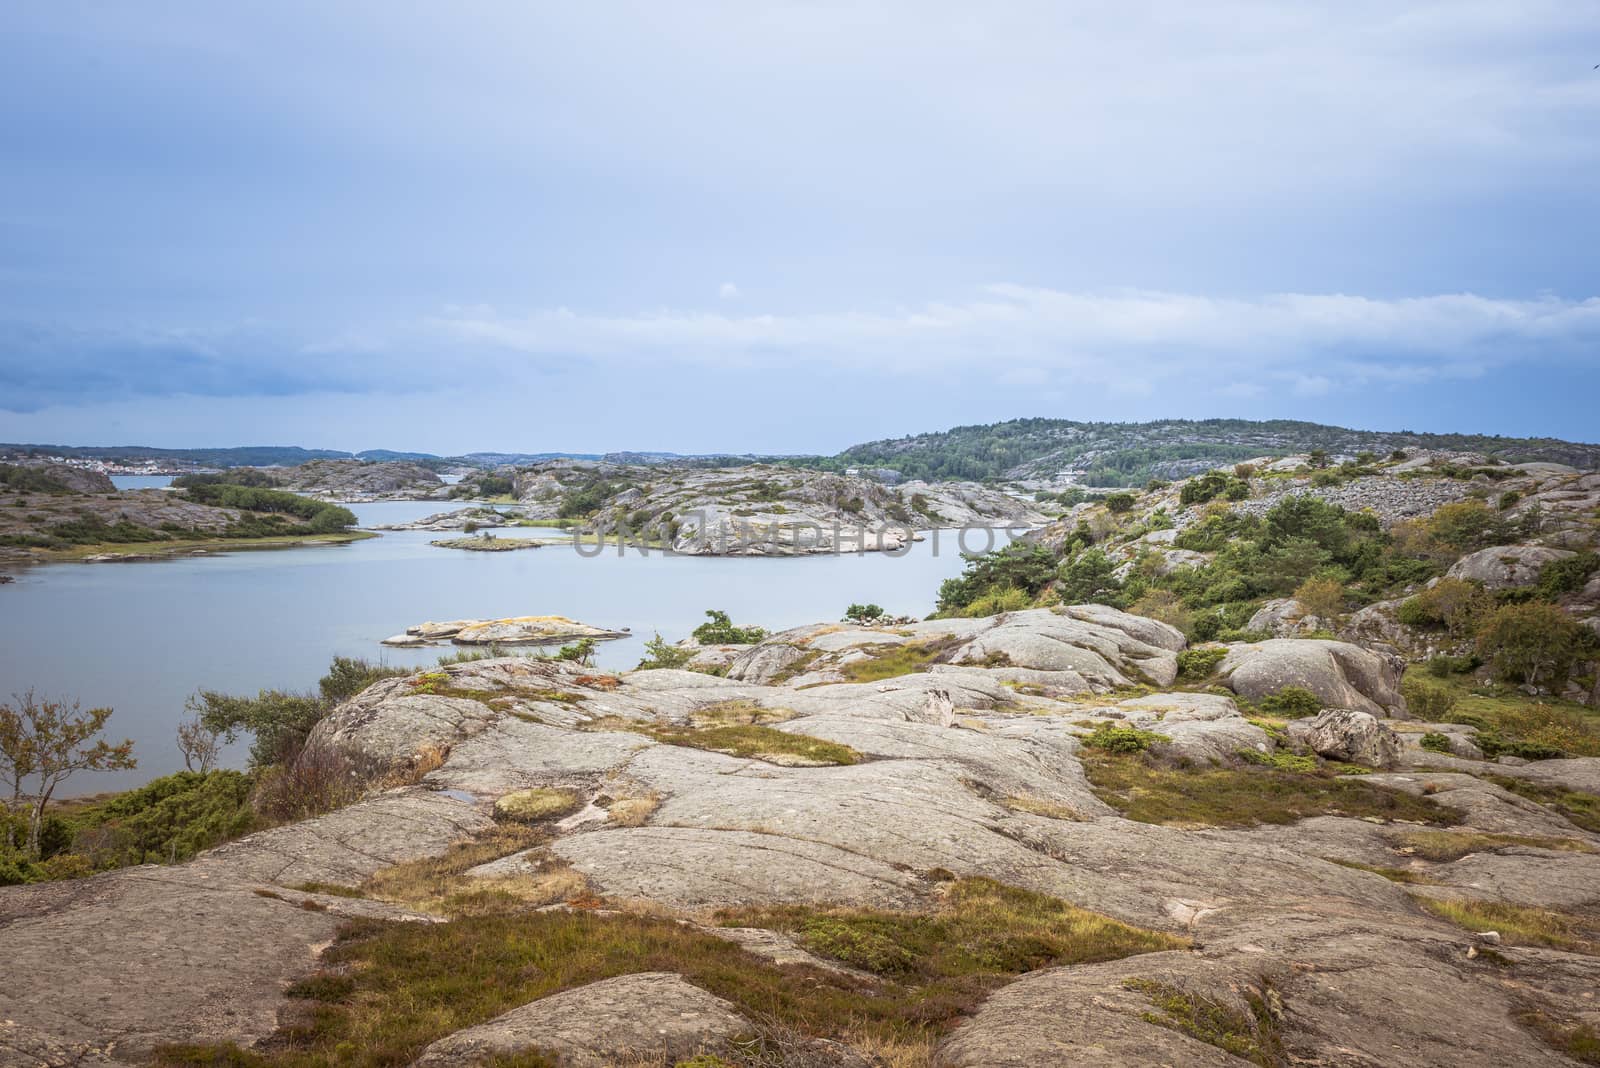 coastline in sweden above fjallbacka with sea as background